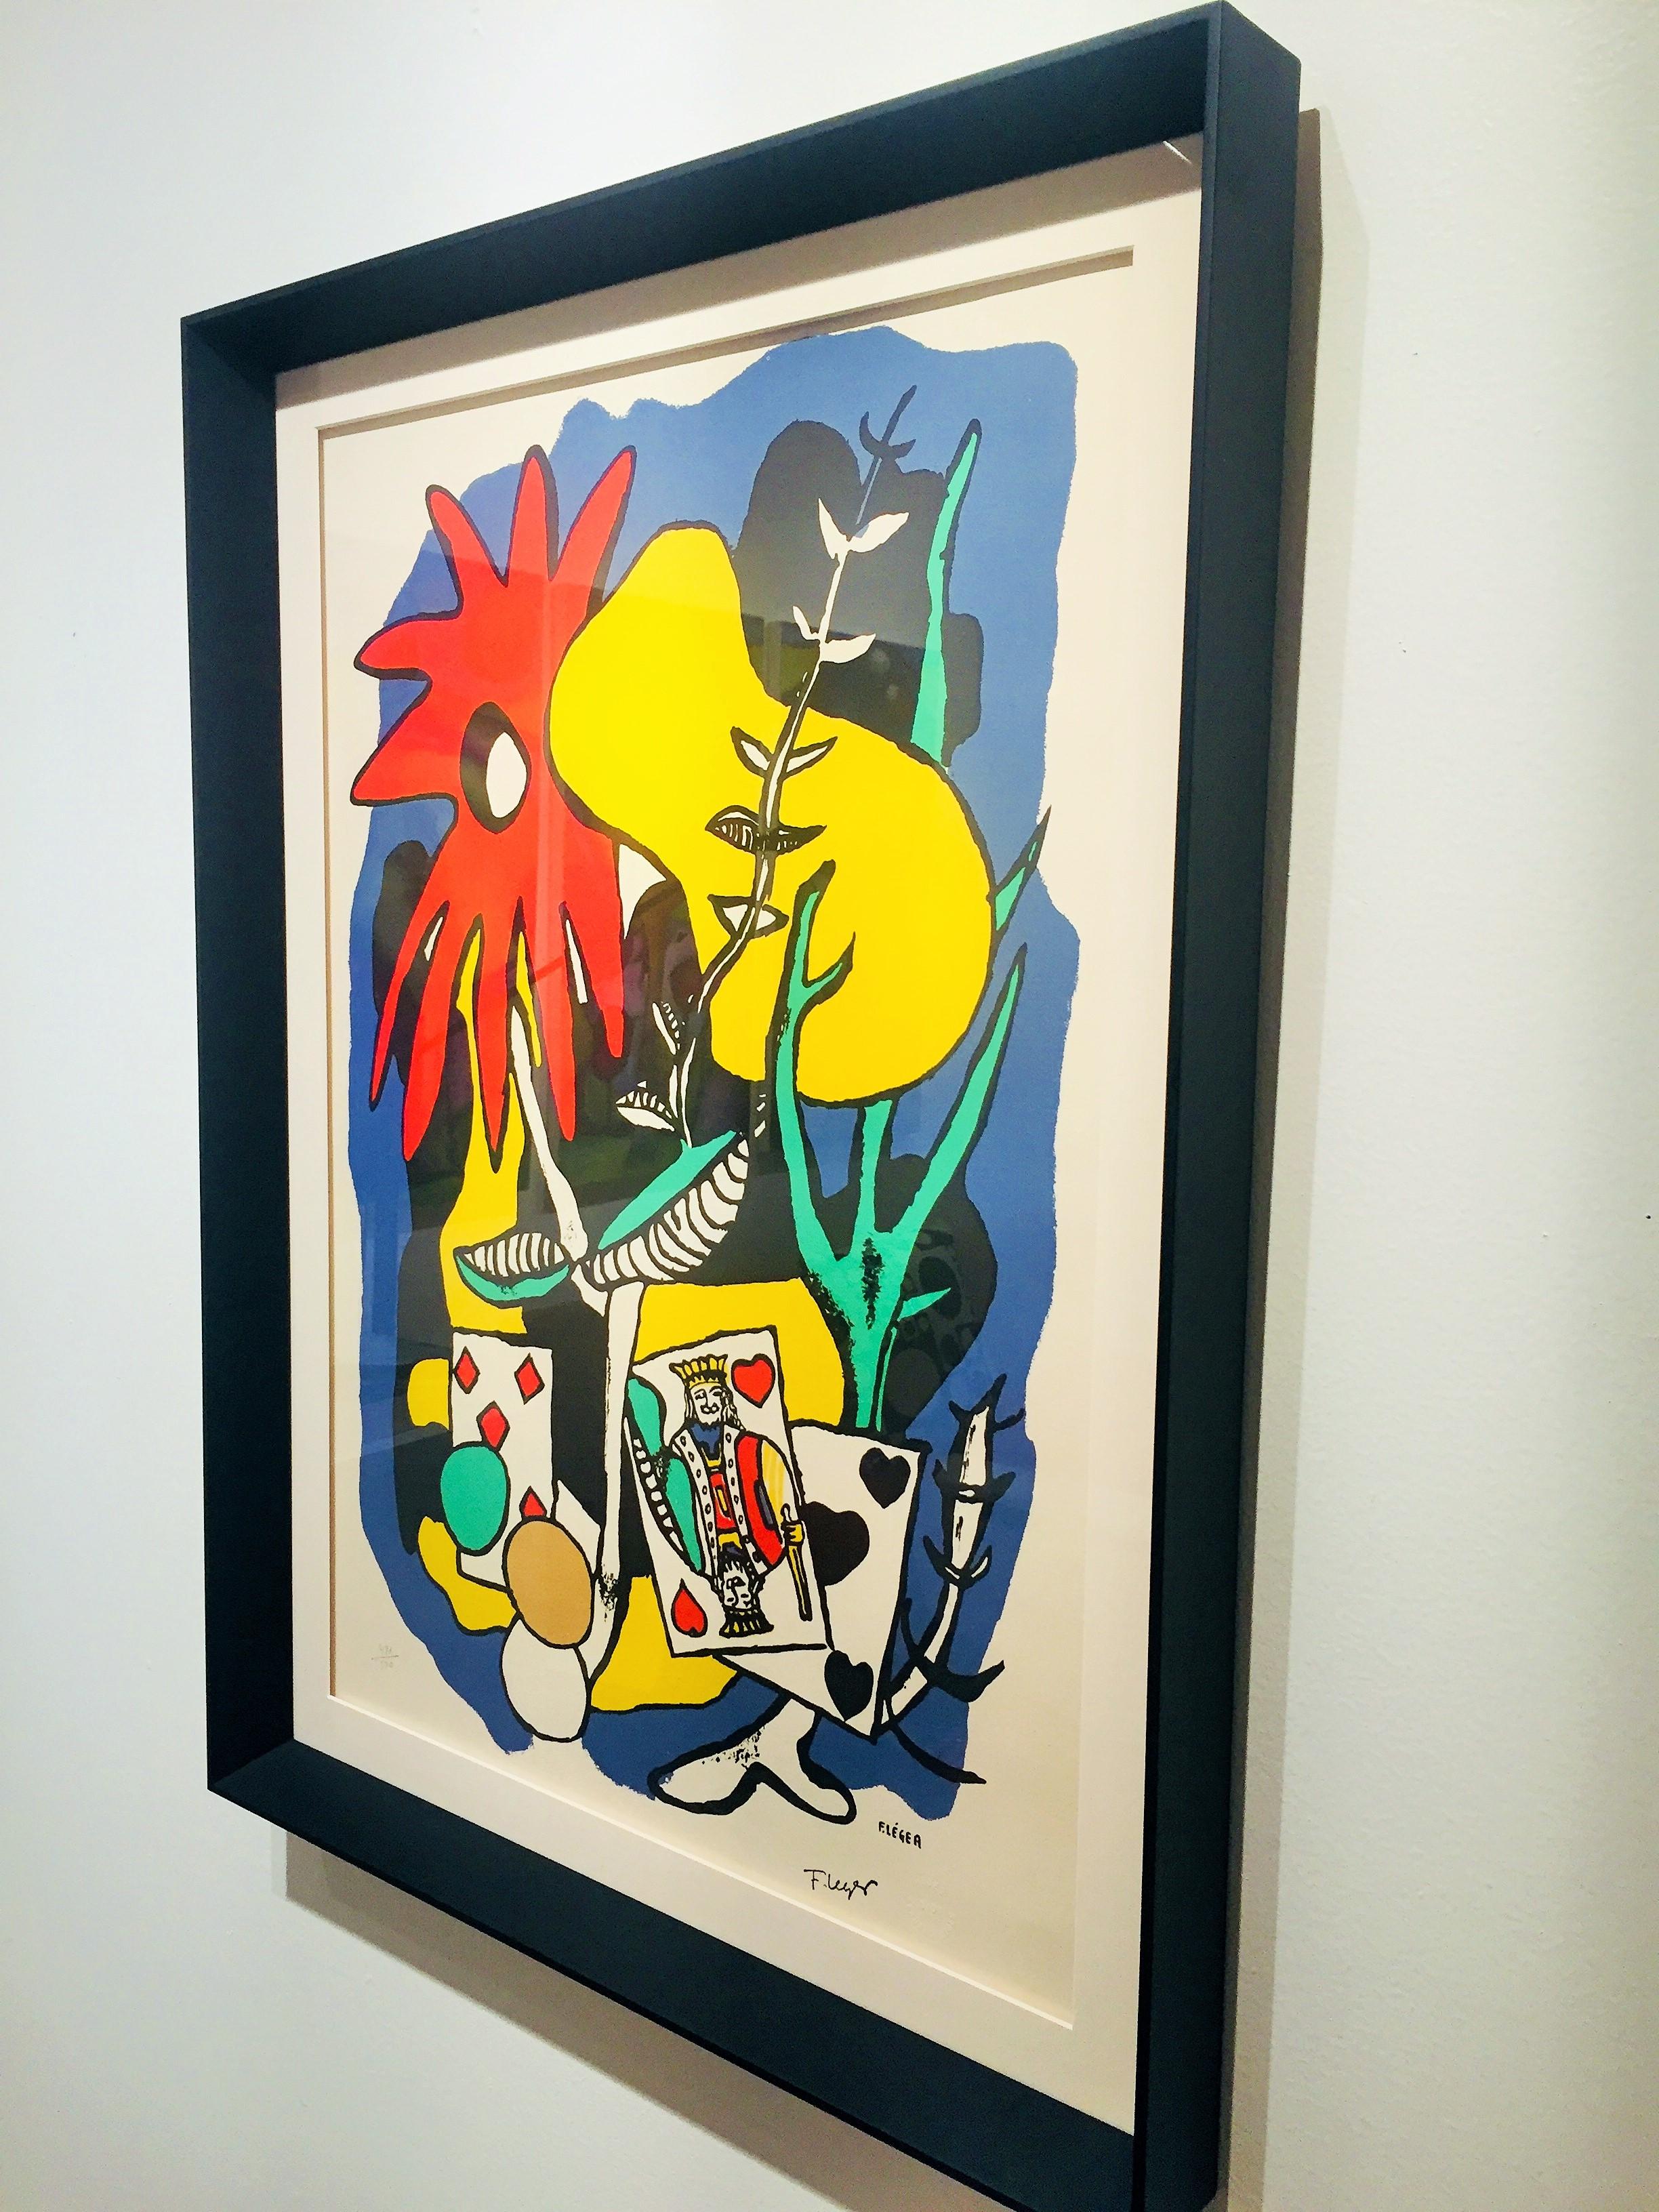 Fernand Leger lithograph is newly framed in archival with archival glass. Frame is black and stands two inches above glass. Lithograph is numbered 481/500 and is stamped 